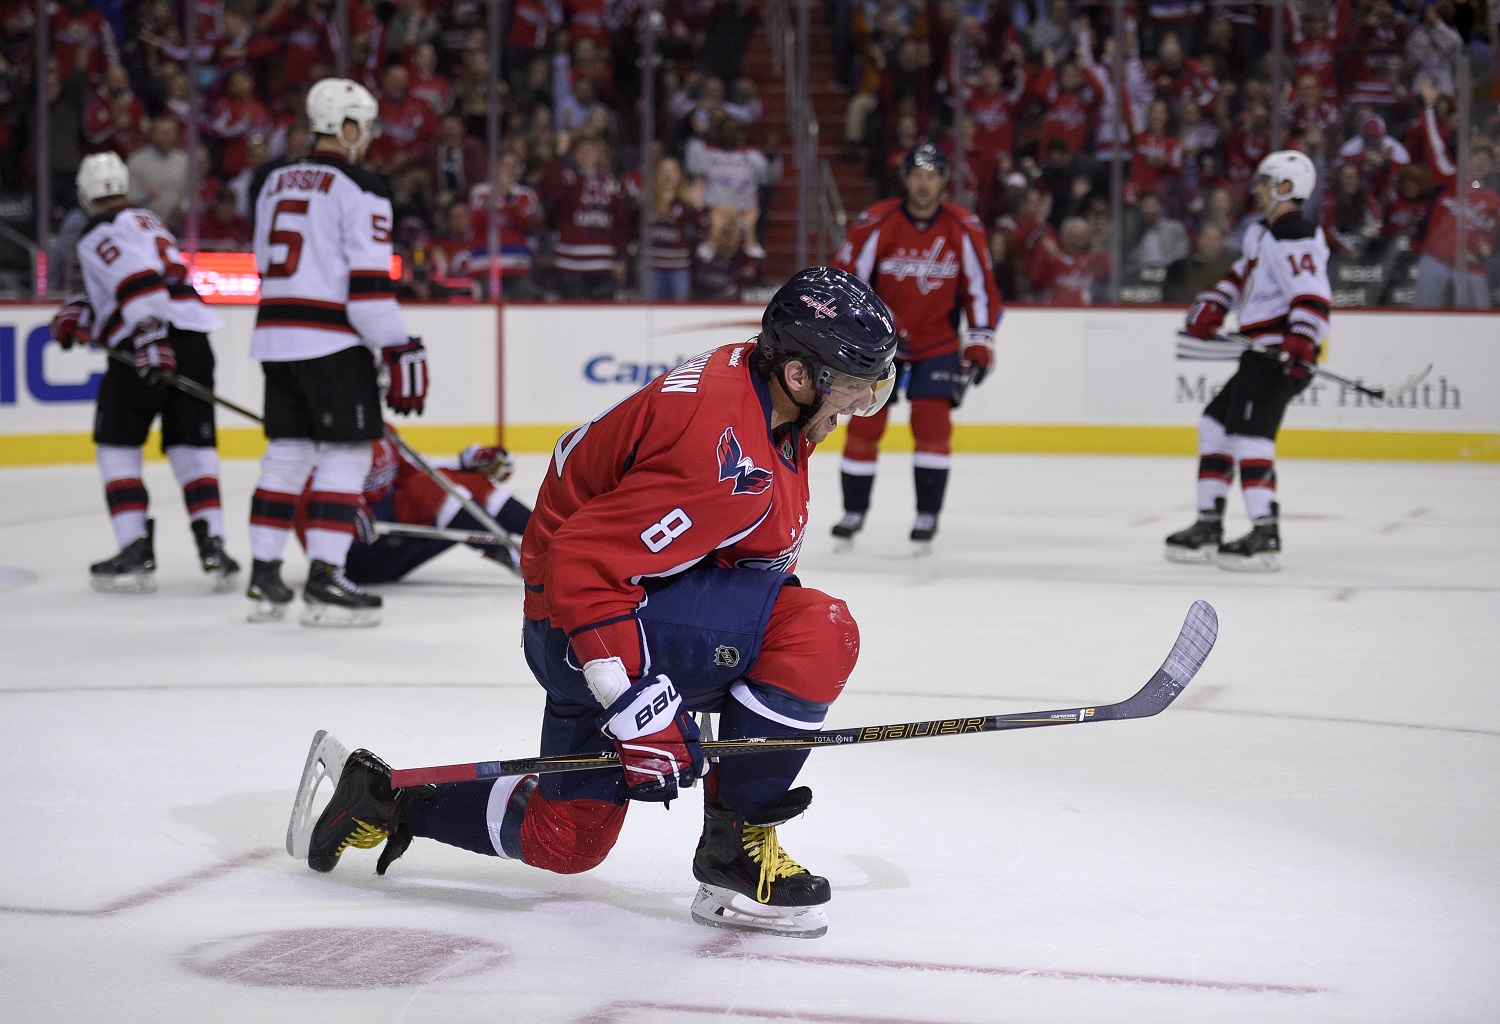 Washington Capitals left wing Alex Ovechkin (8), of Russia, celebrates his goal during the first period of an NHL hockey game against the New Jersey Devils, Saturday, Feb. 20, 2016, in Washington. (AP Photo/Nick Wass)